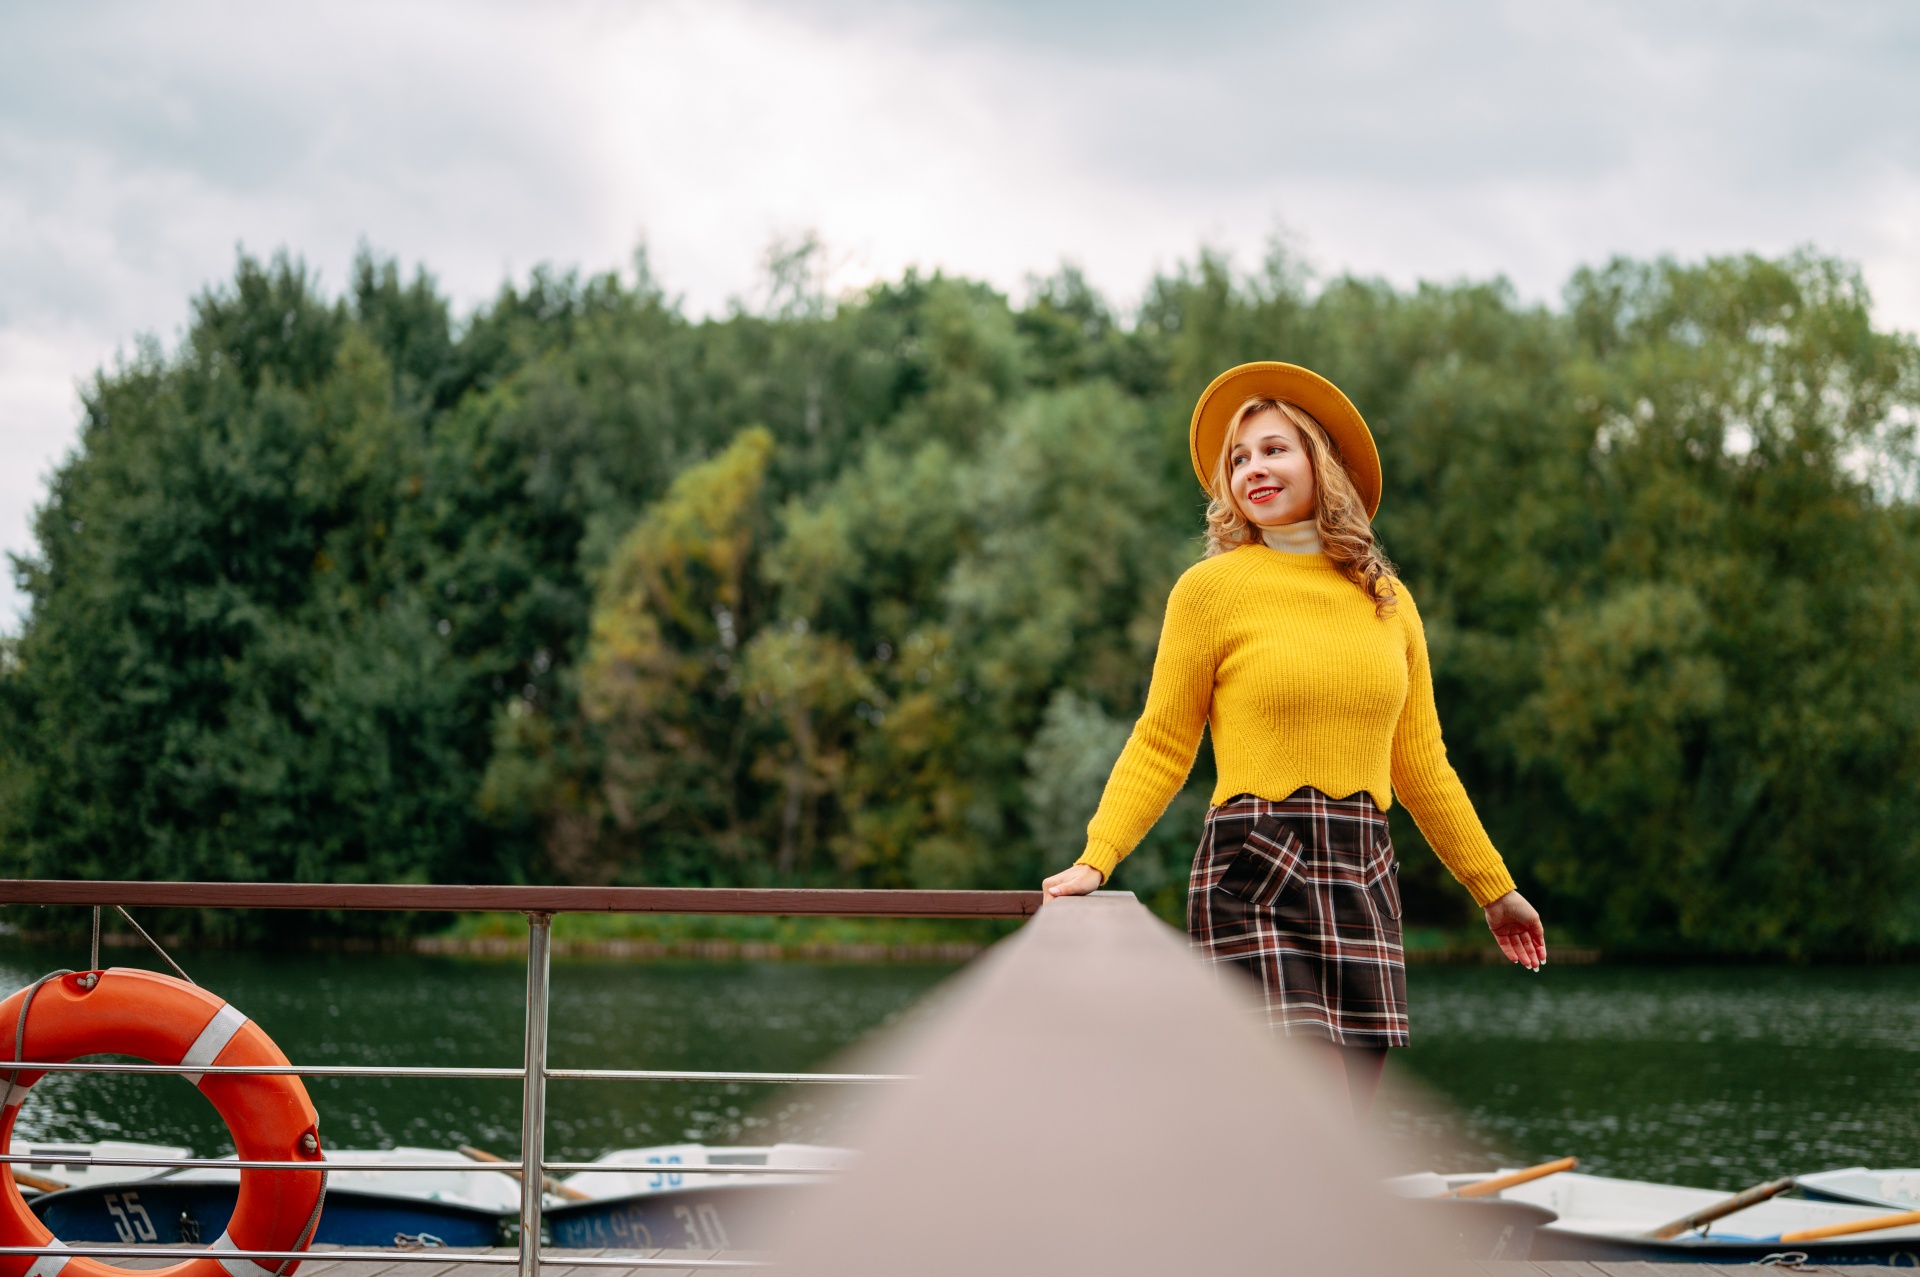 boat station, pier, autumn, rental, boats, woman, entertainment, recreation, posing, model, blonde, yellow, sweater, bright, autumn clothes, fashion, style, lake, river, water, joy, emotions, walk,